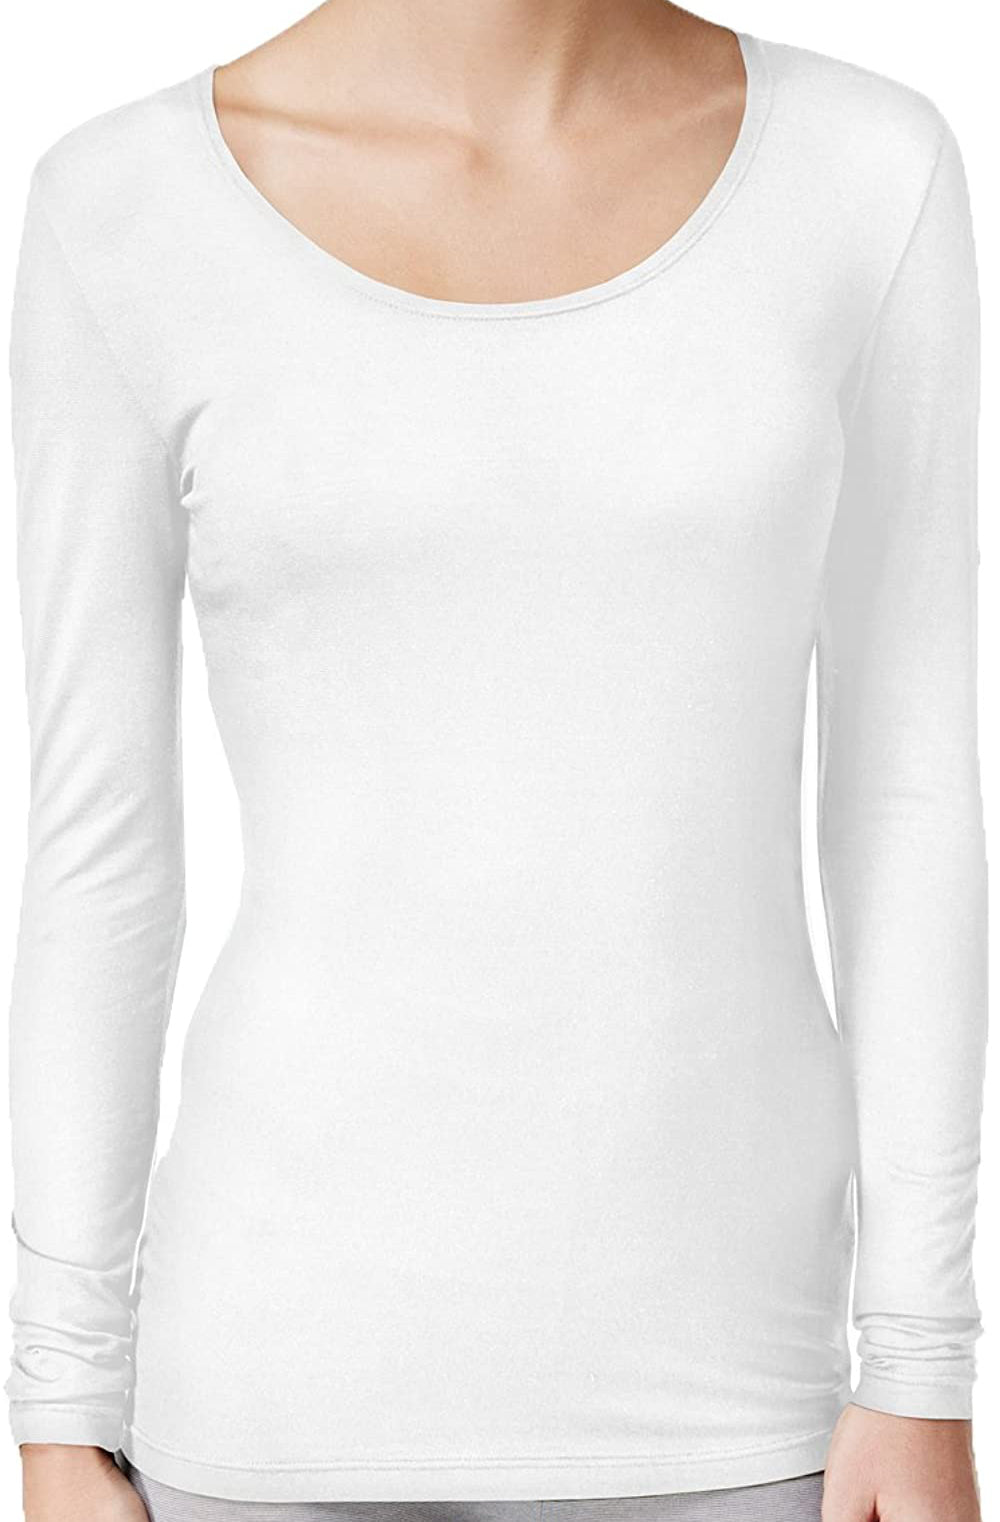 32 DEGREES Womens Base Layer Scoop-Neck Top